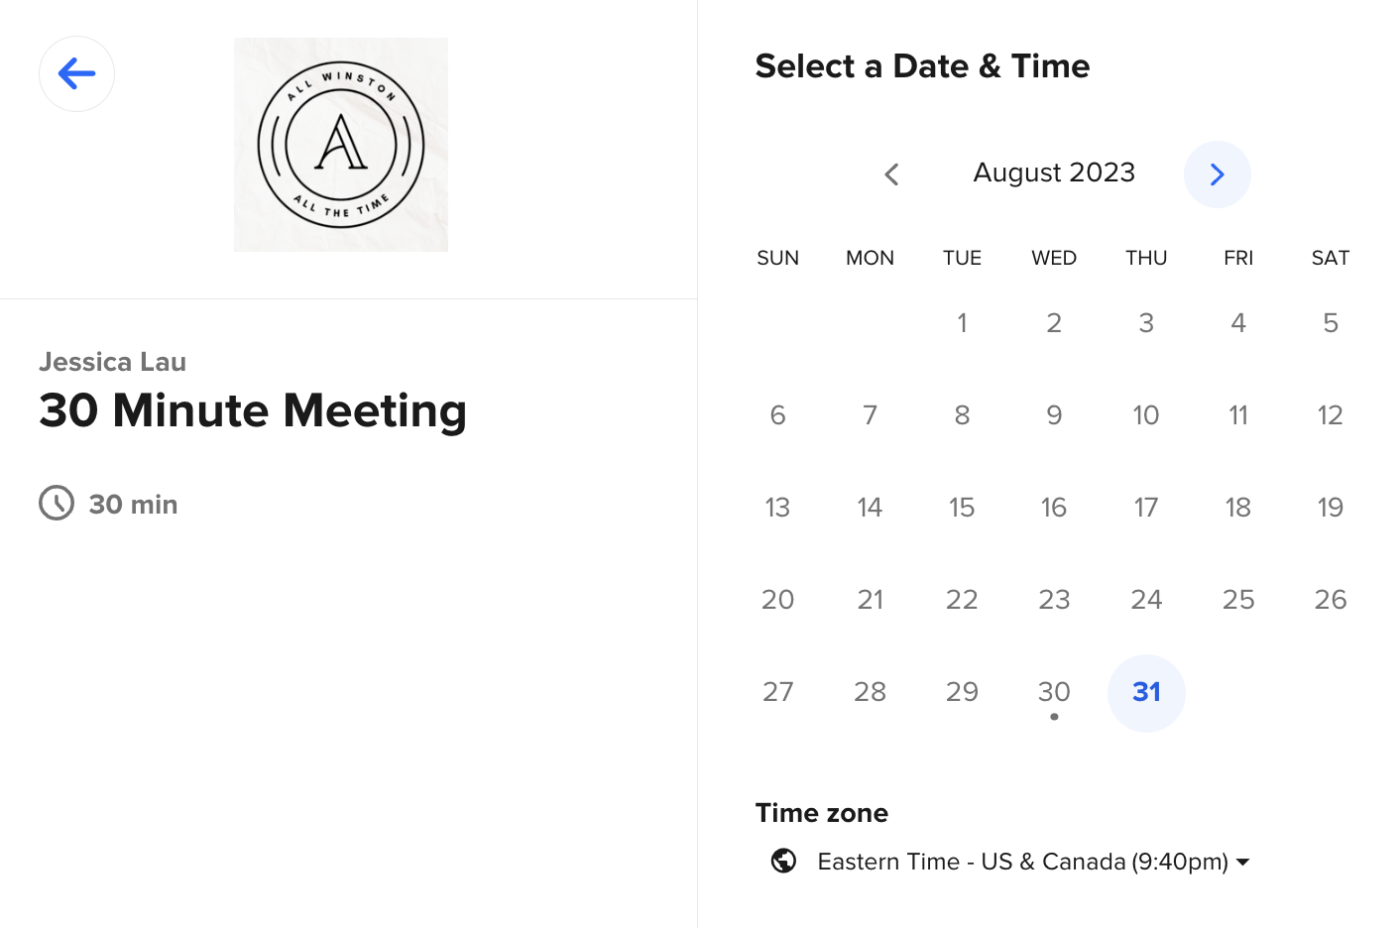 Example of a Calendly scheduling page without the Calendly branding.